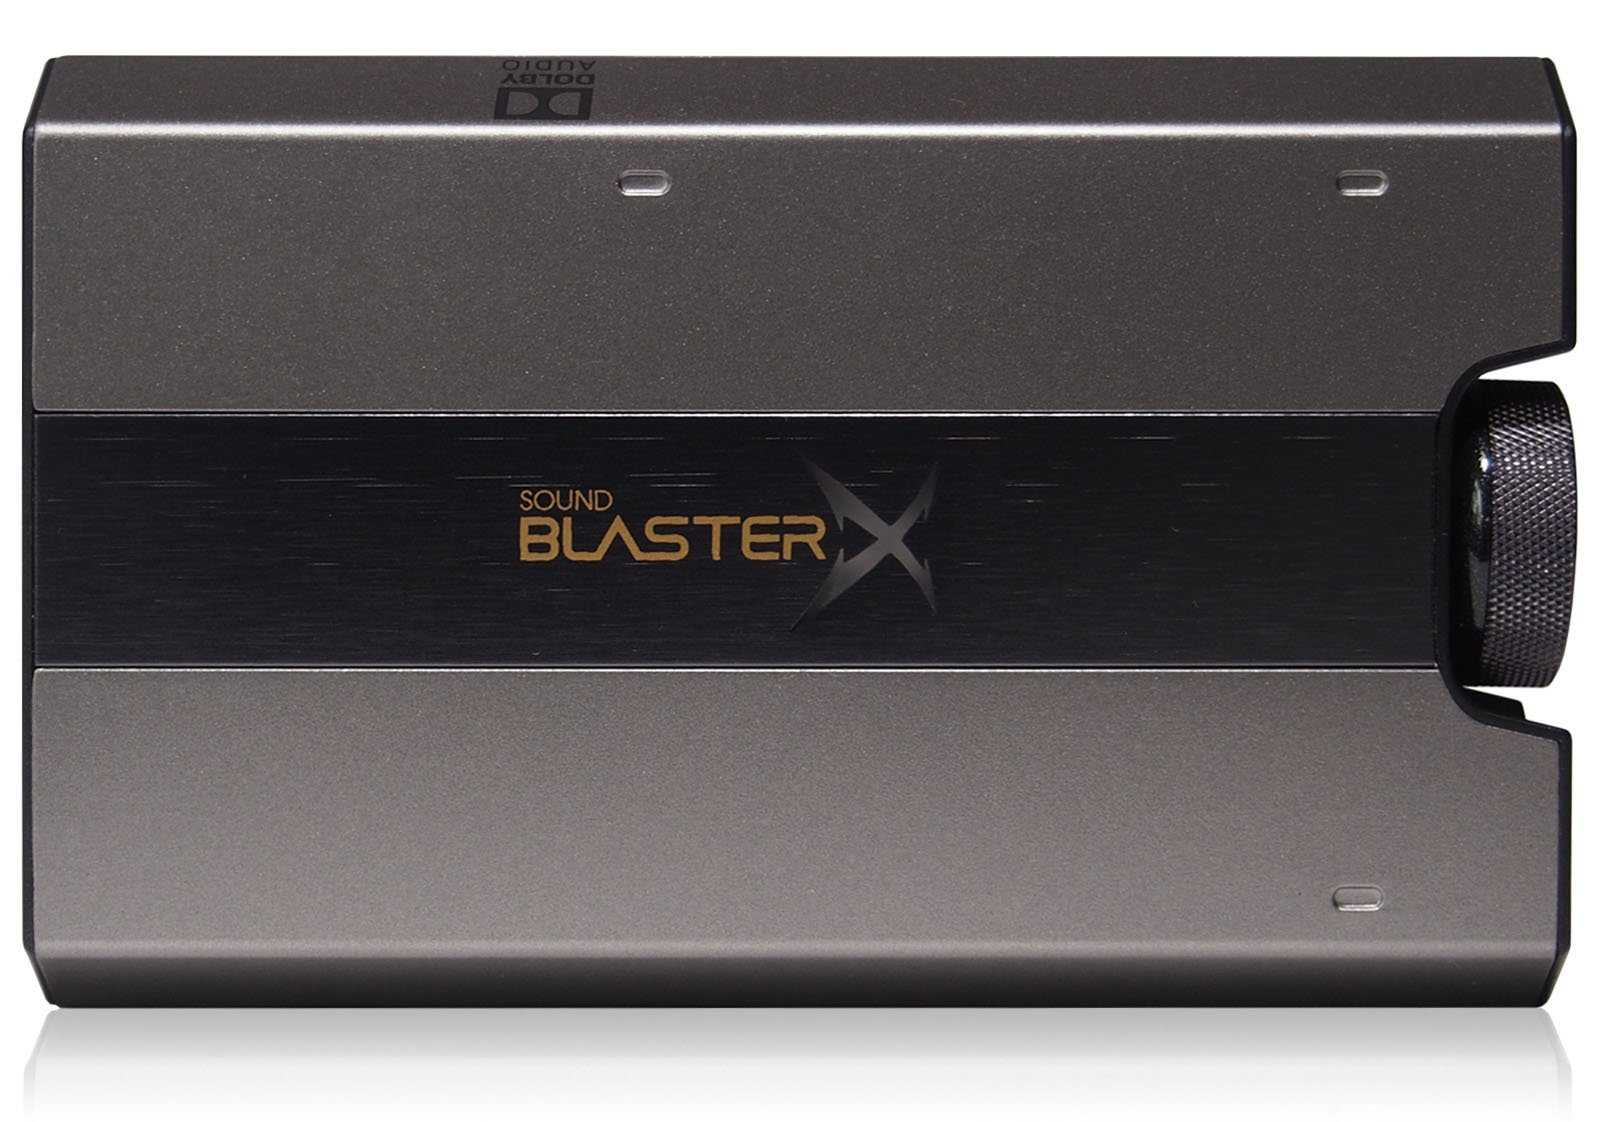 Creative sound blasterx g6 review – the best gaming amp-dac!